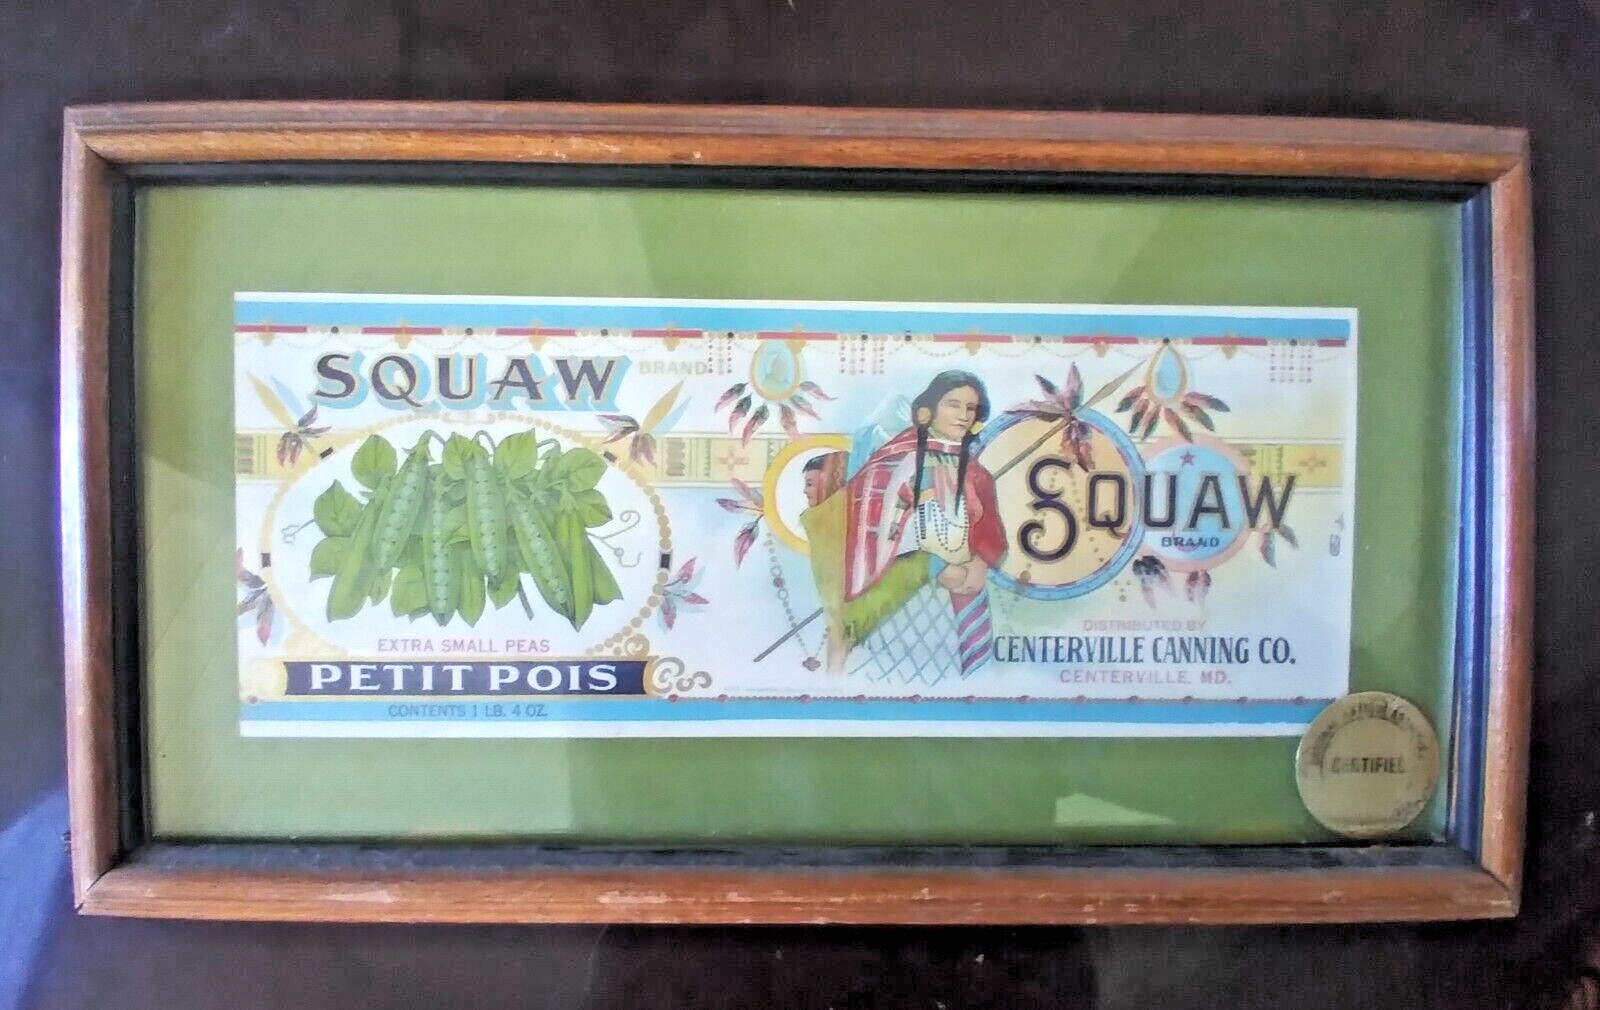 Vintage Advertising 1920's label. Picture, Framed & Antique, rare Collectible